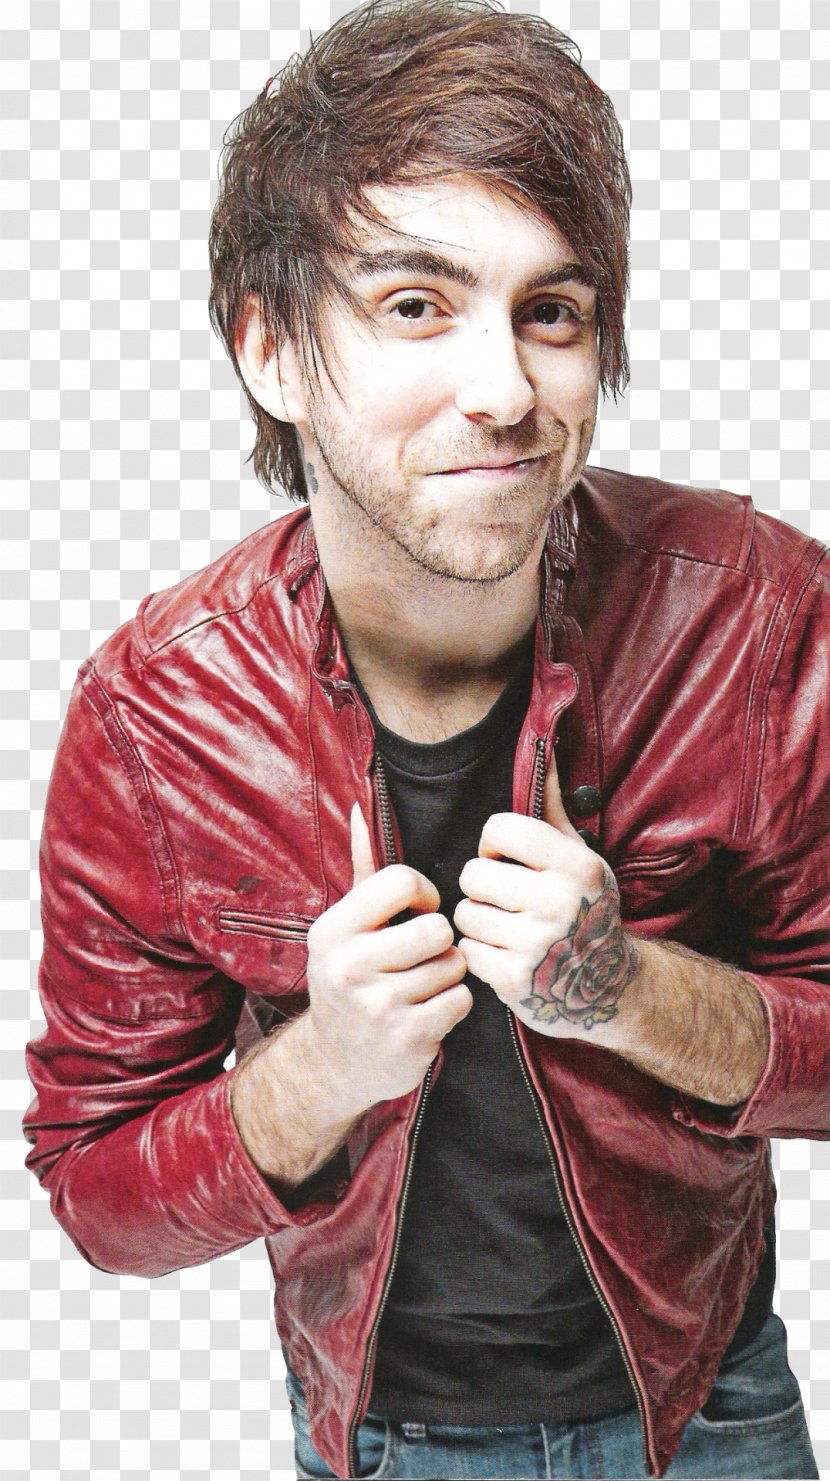 Alex Gaskarth All Time Low Sticks, Stones And Techno Musician Musical Ensemble - Frame - Flower Transparent PNG